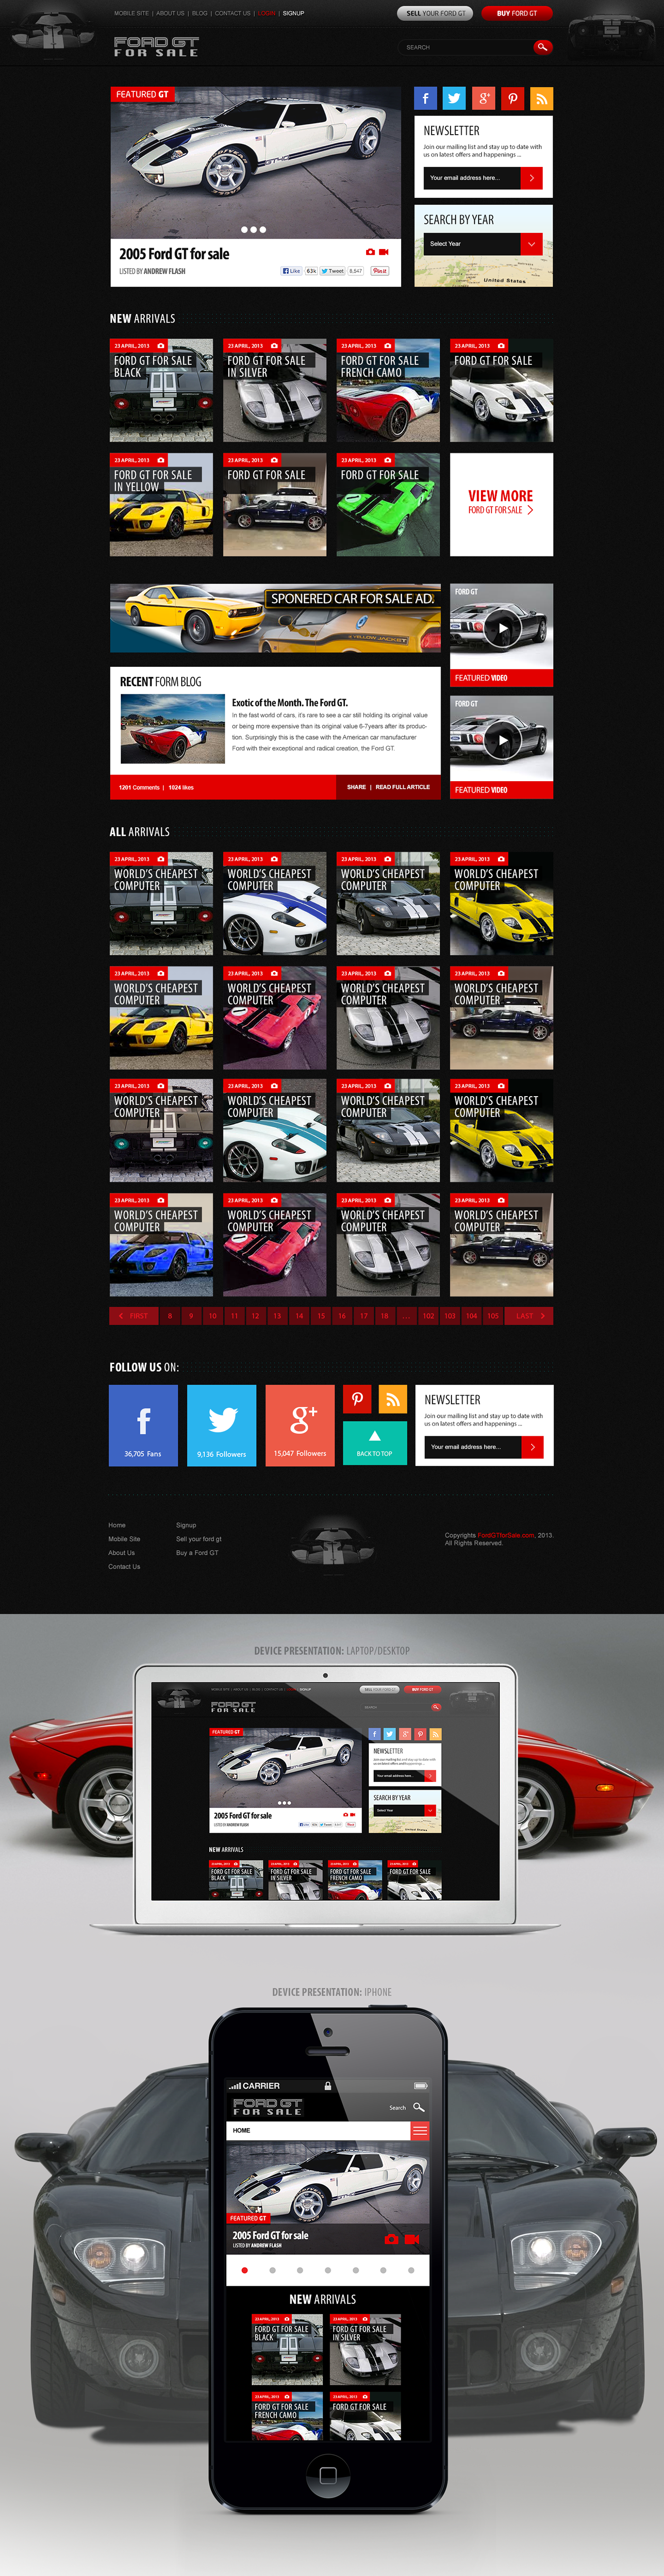 Website Interface user experience HTML 5 jquery mod year 2015